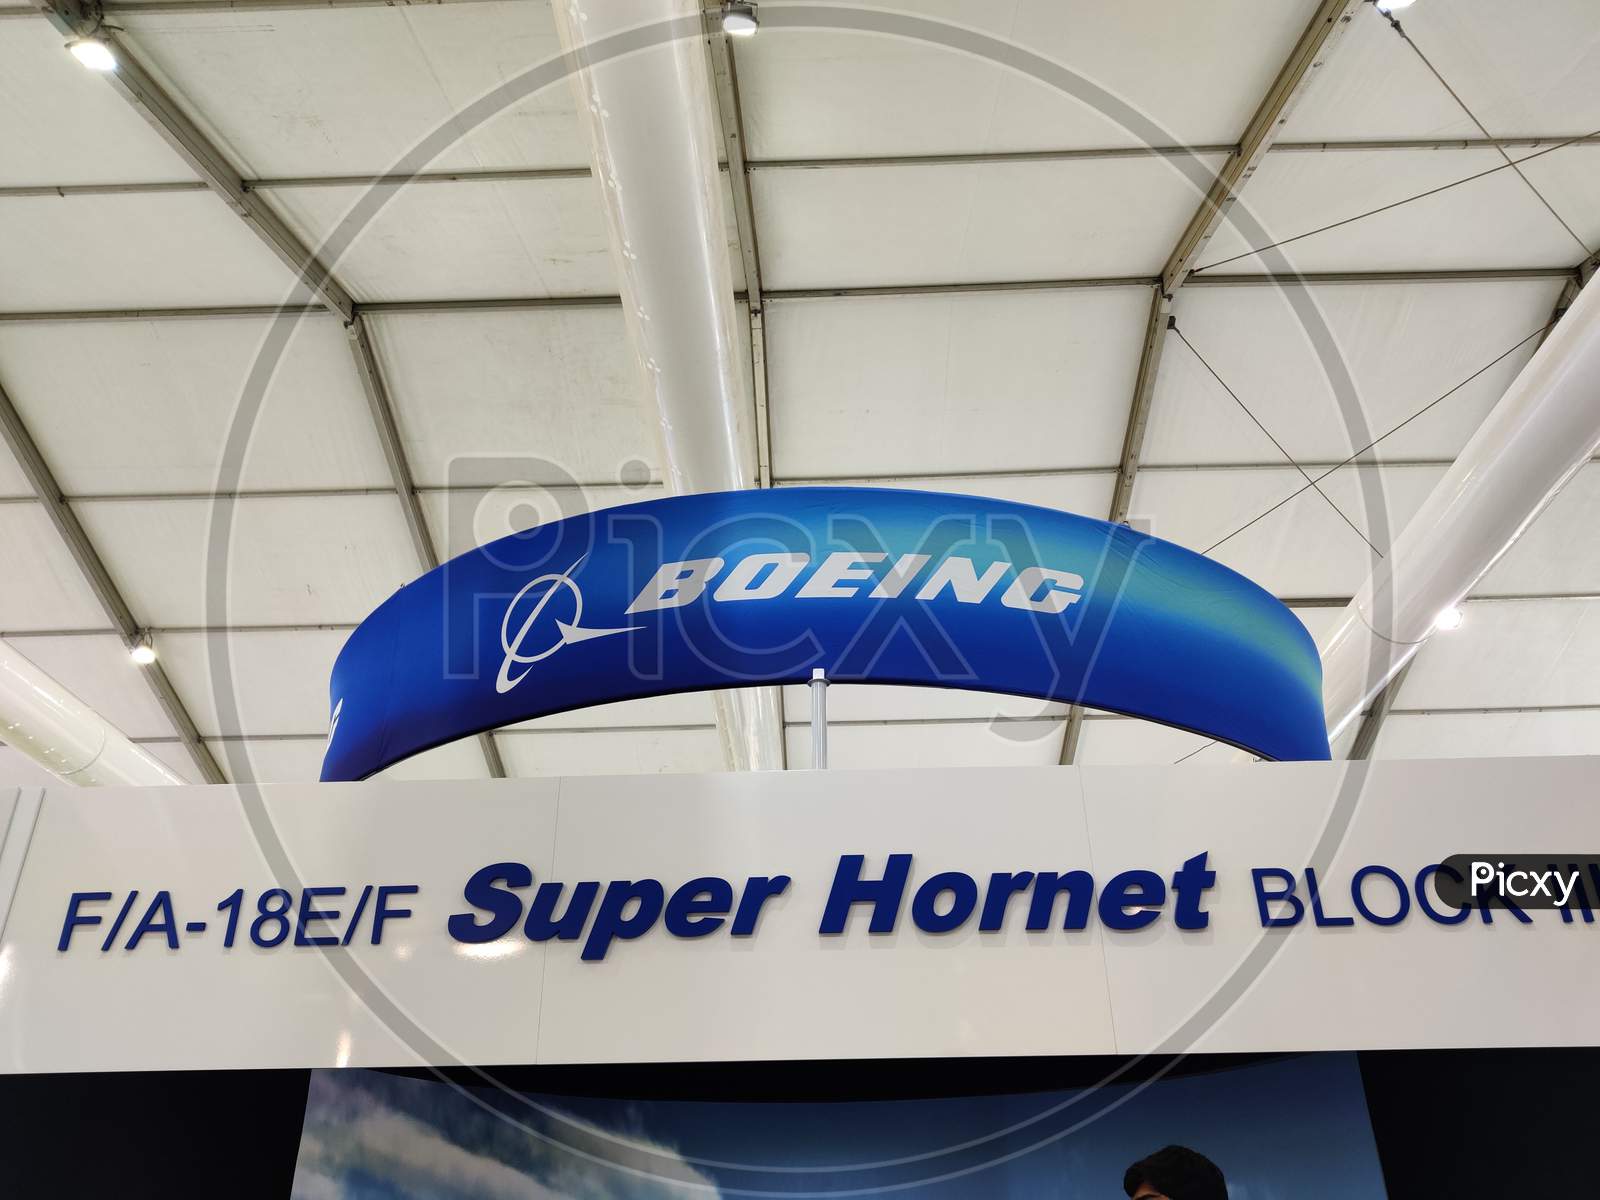 Boeing - Defence Expo 2020